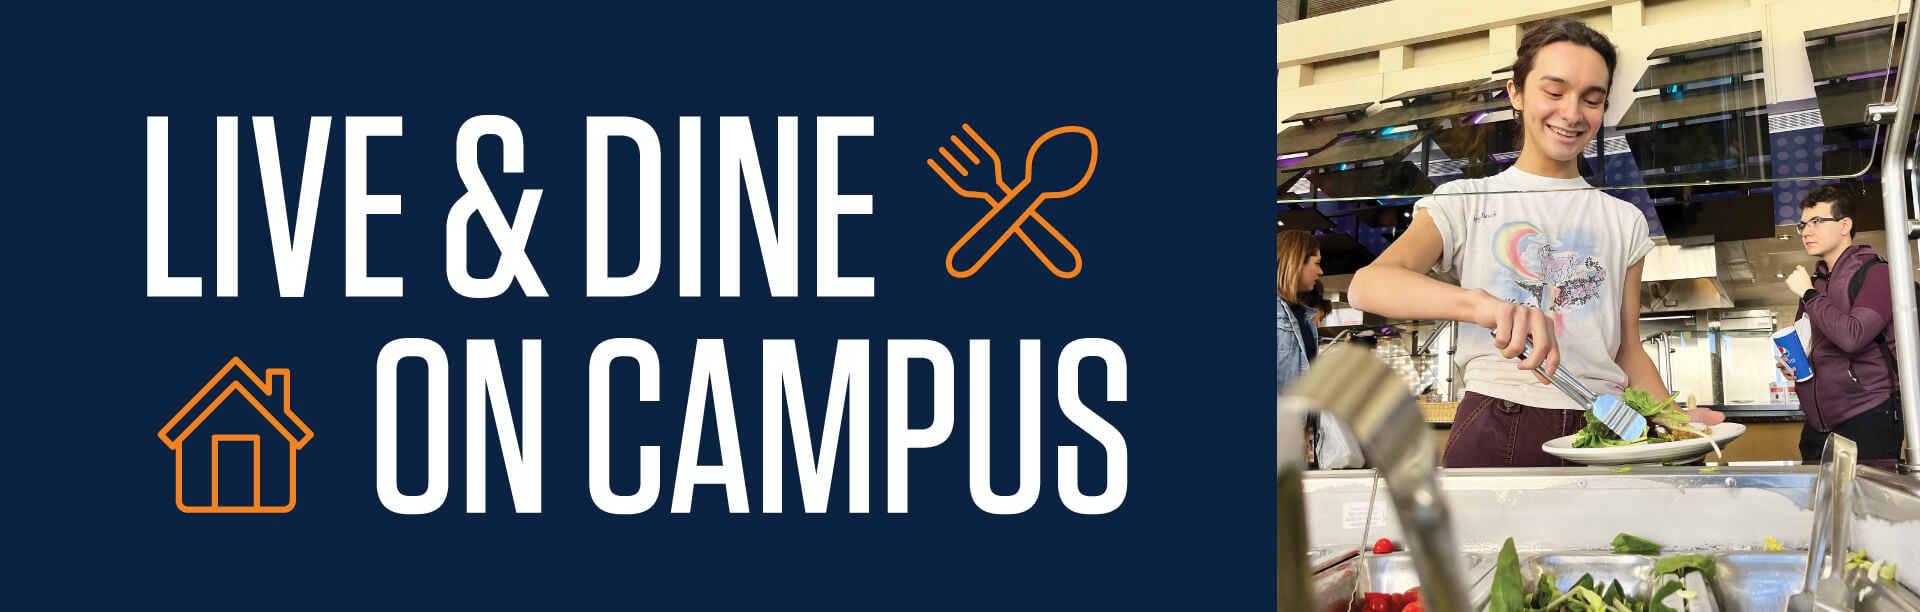 Live and dine on campus